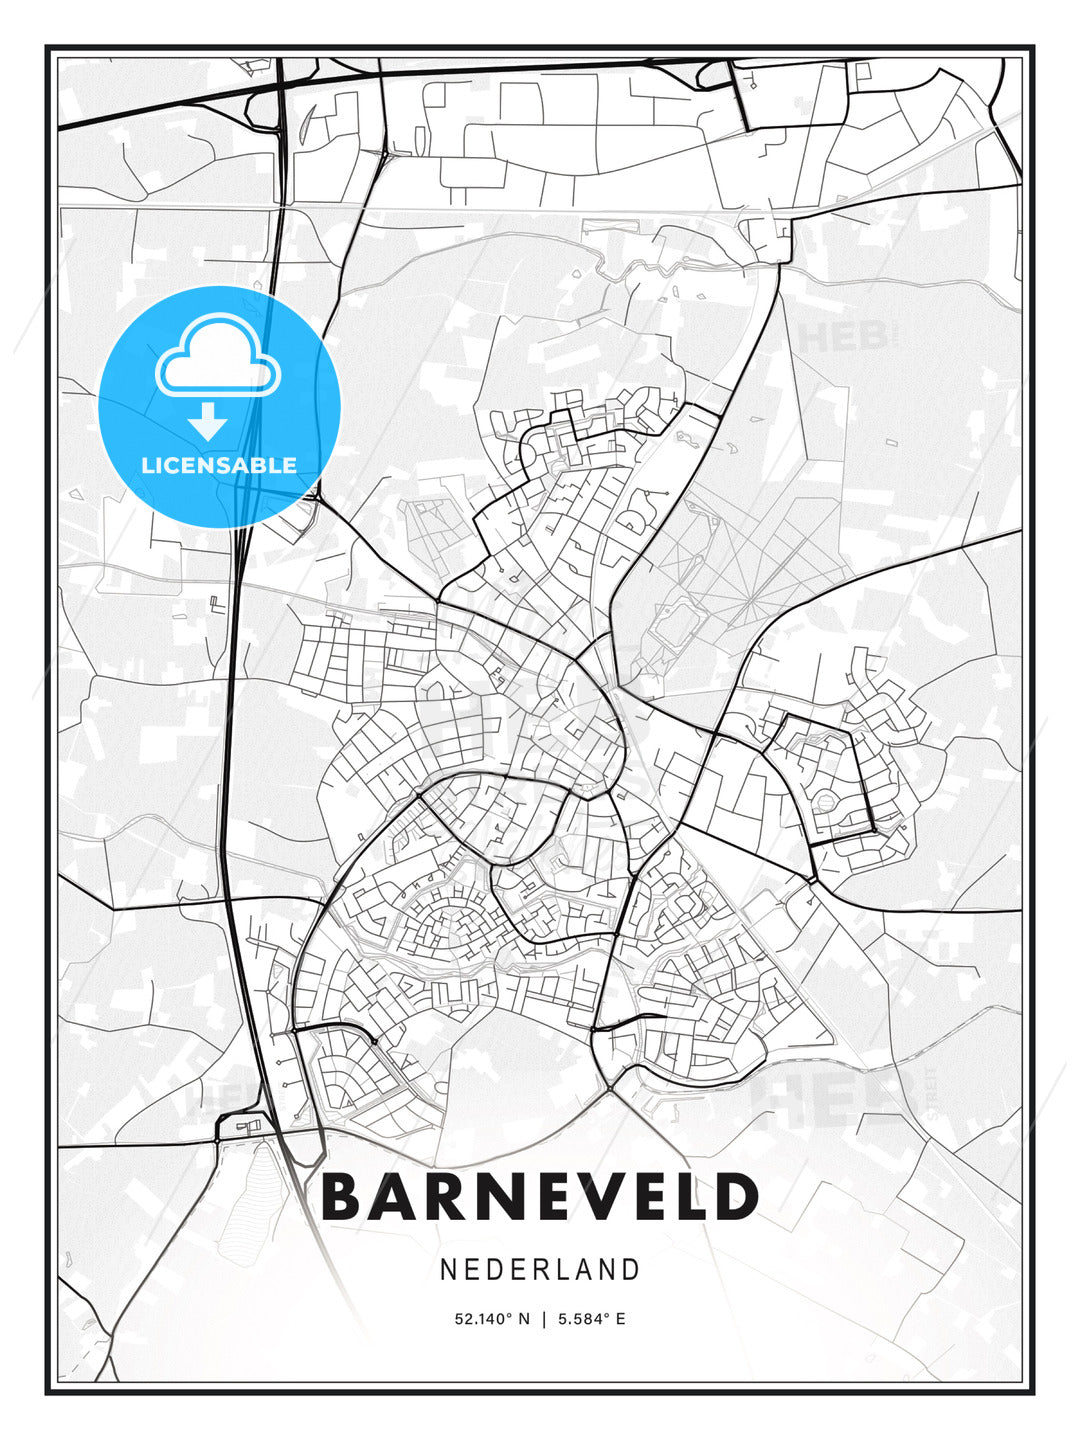 Barneveld, Netherlands, Modern Print Template in Various Formats - HEBSTREITS Sketches